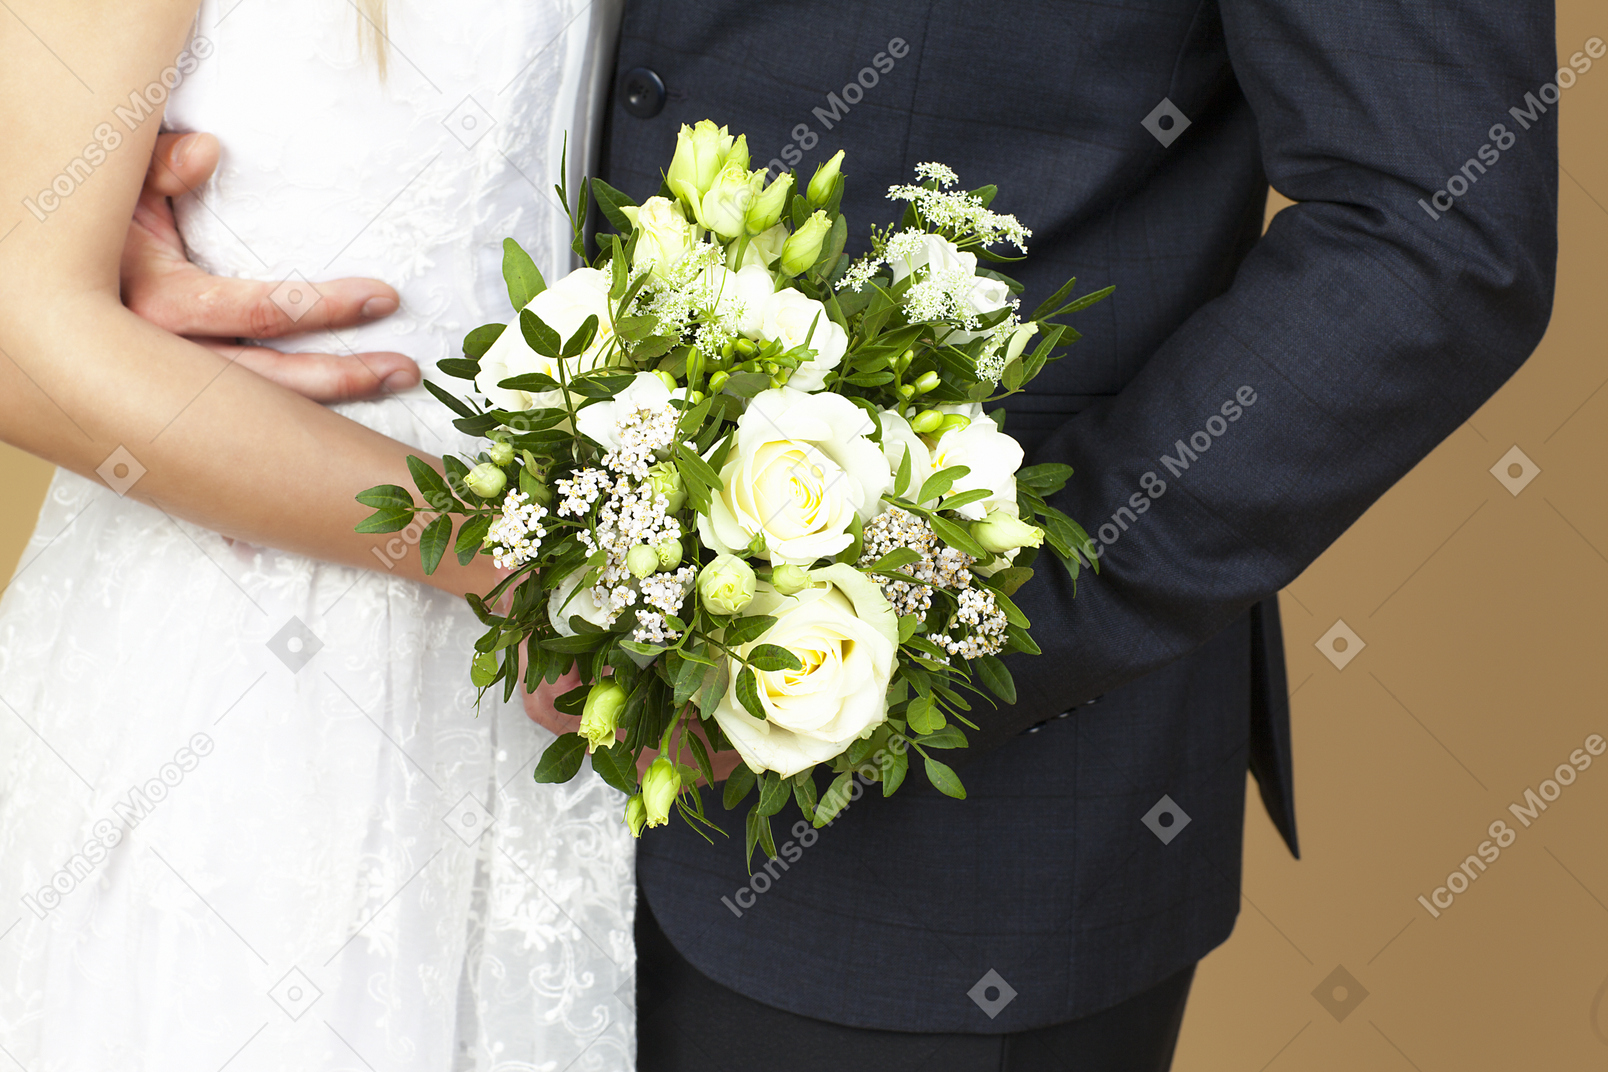 Bride and groom holding a wedding bouquet